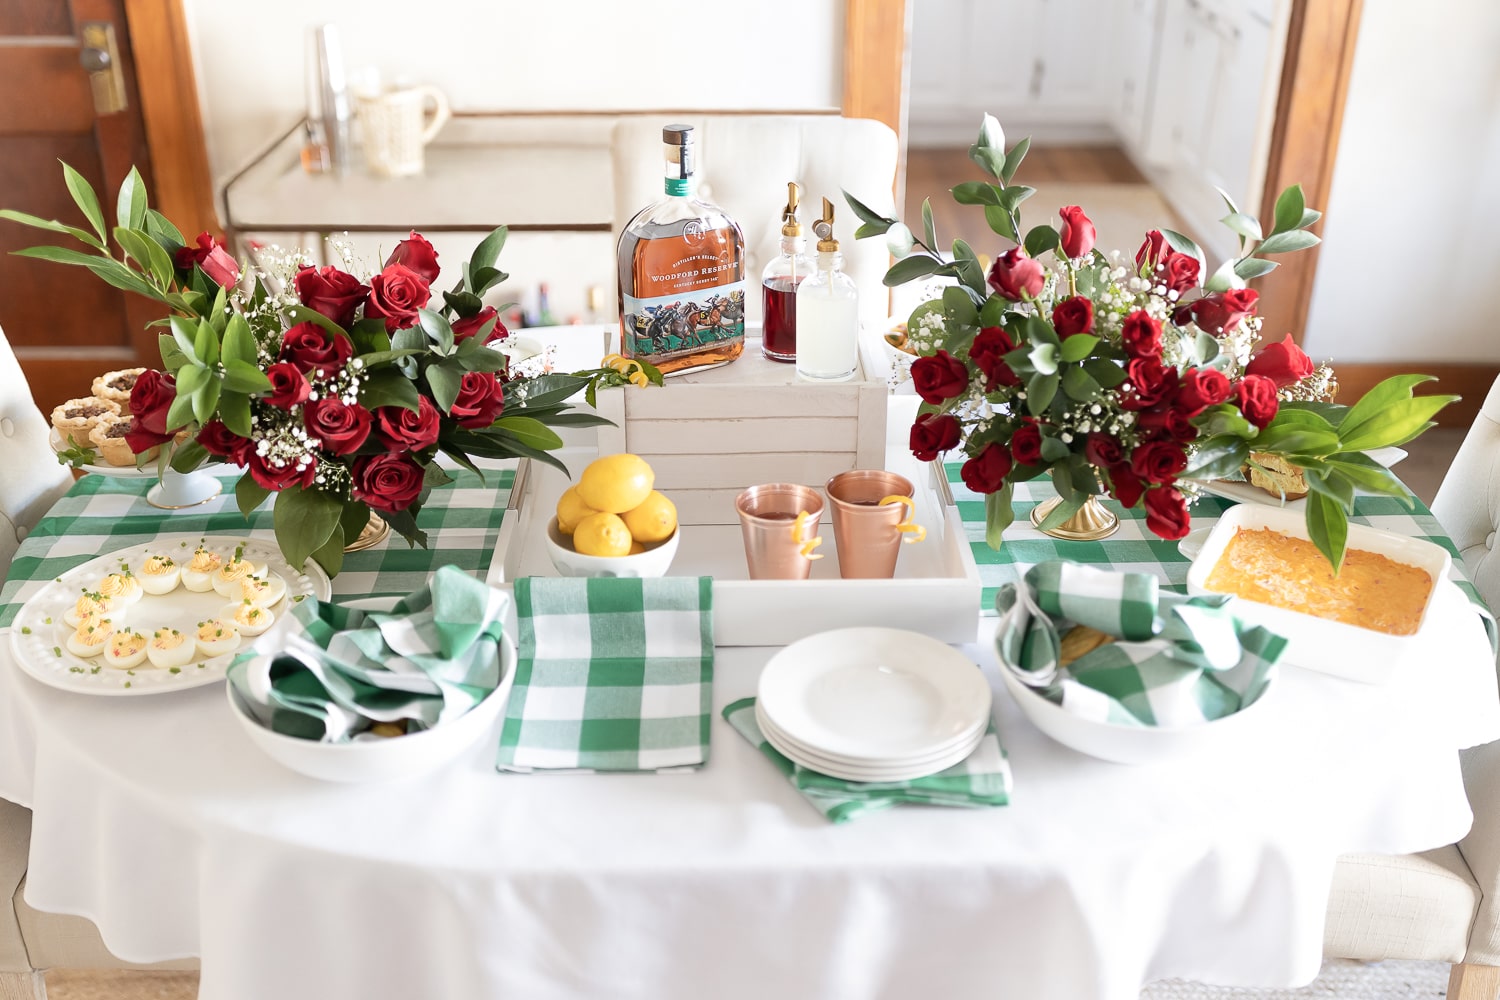 Southern blogger Stephanie Ziajka shares Kentucky Derby ideas for hosting the perfect party on Diary of a Debutante